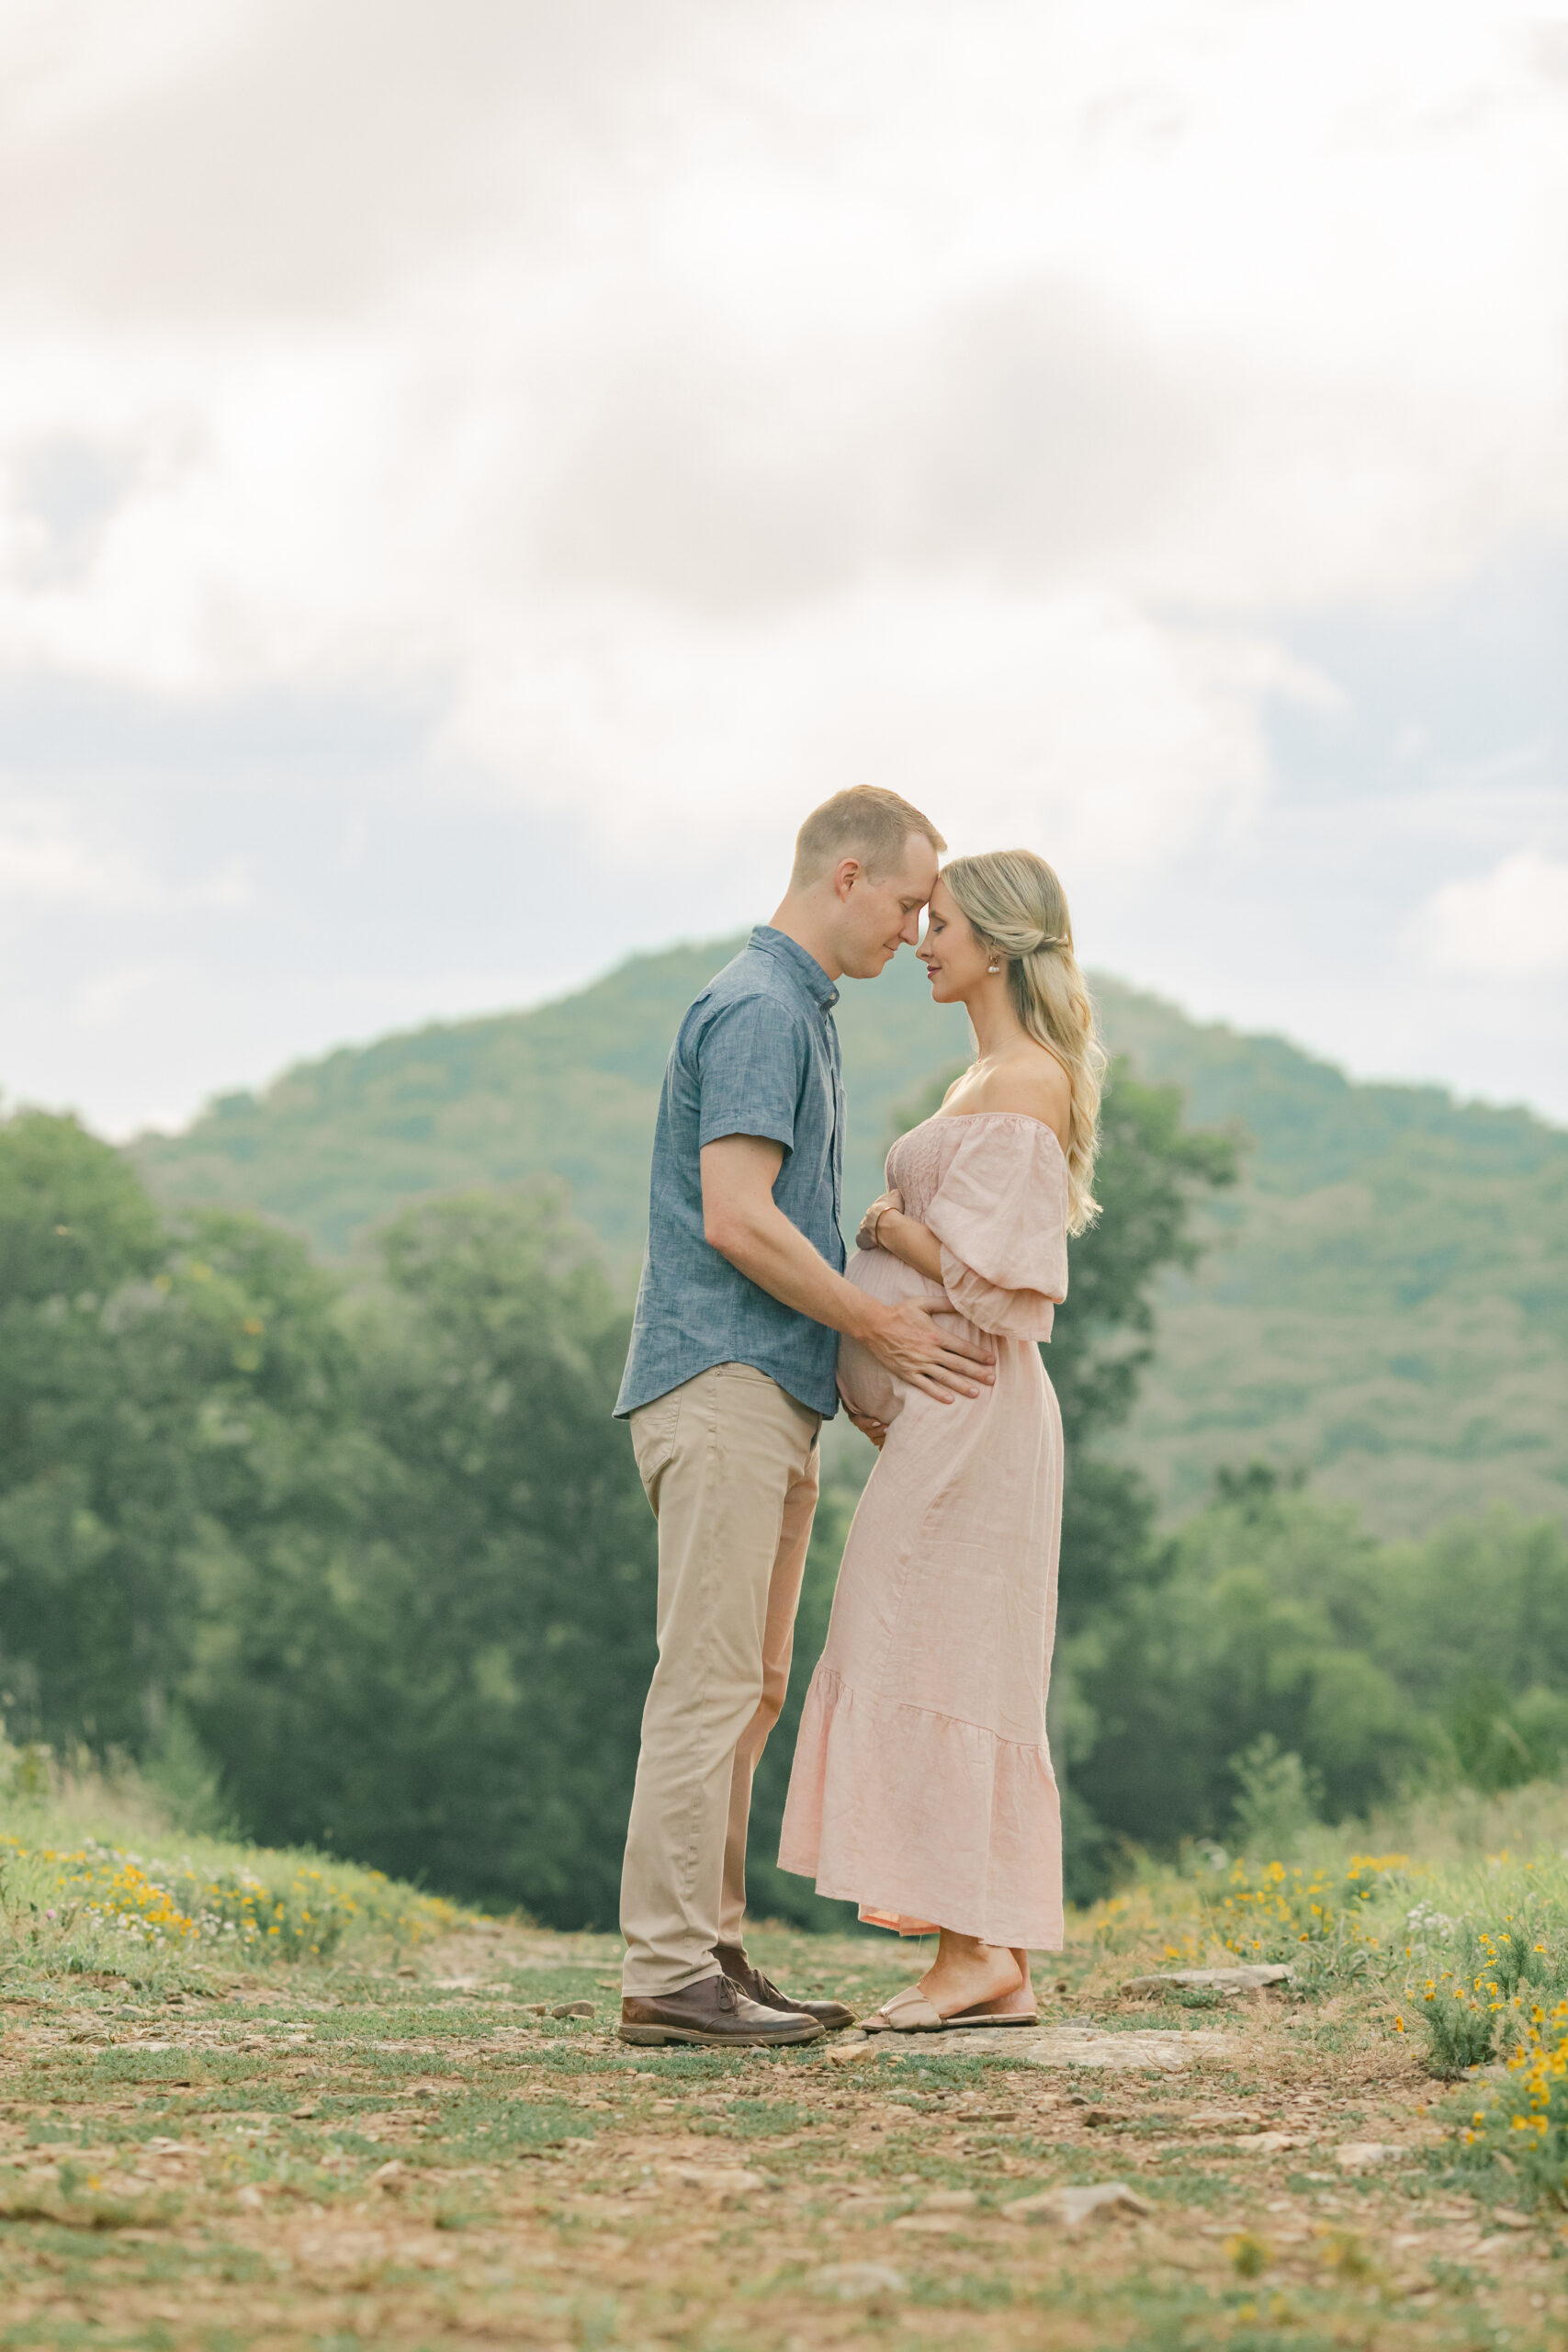 Outdoor Maternity Session in Nashville TN. Mom and dad to be